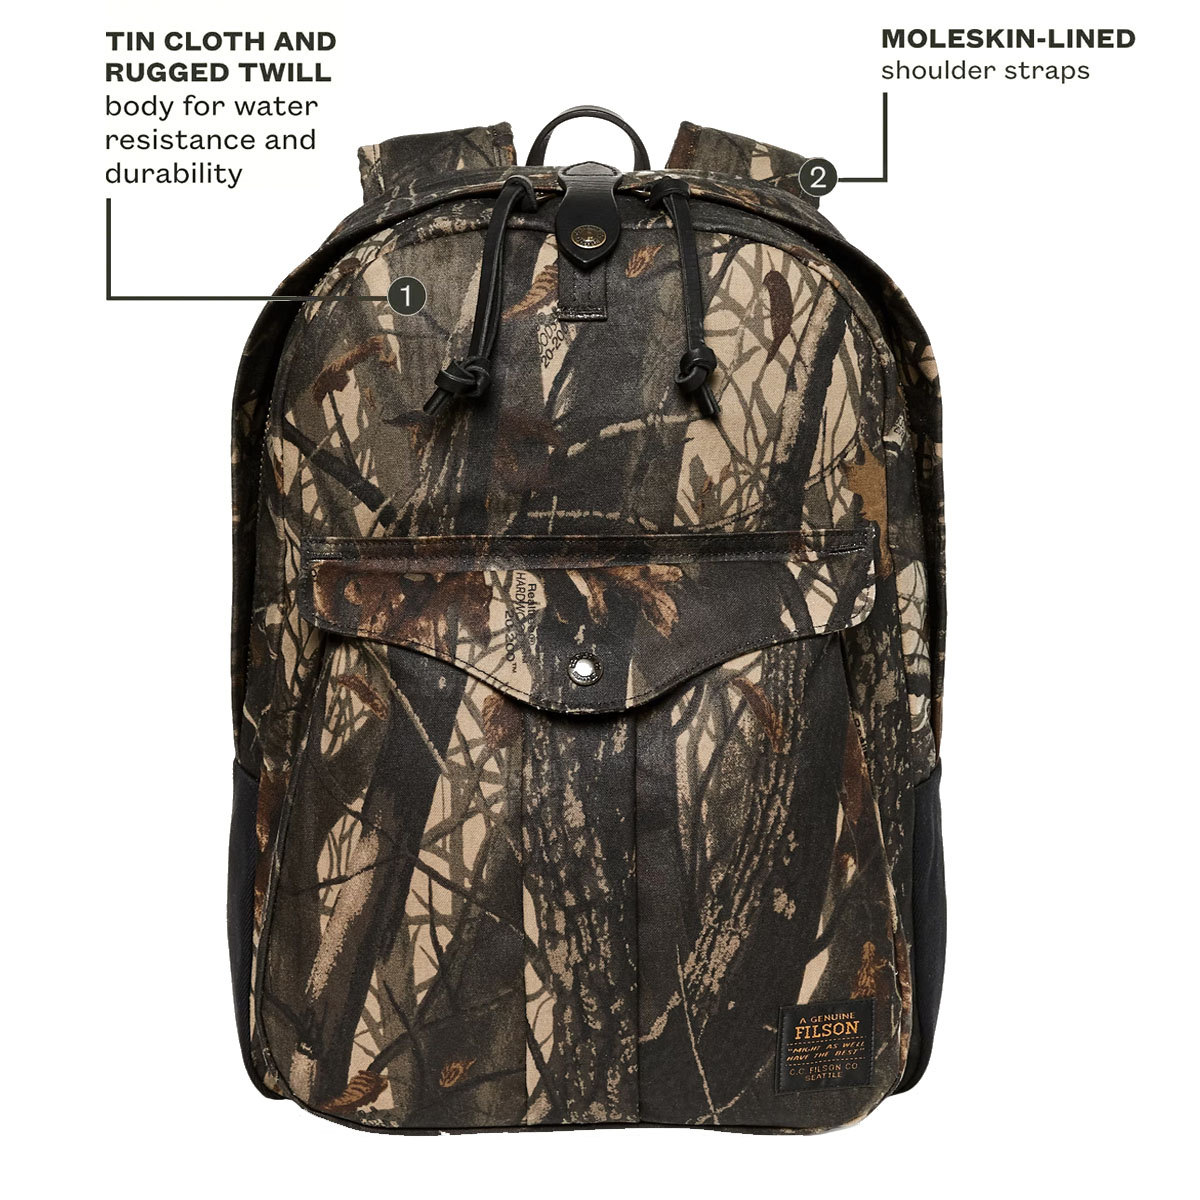 Filson Journeyman Backpack Realtree Hardwoods Camo, made of Tin Cloth and Rugged Twill Canvas for water resistance and durability